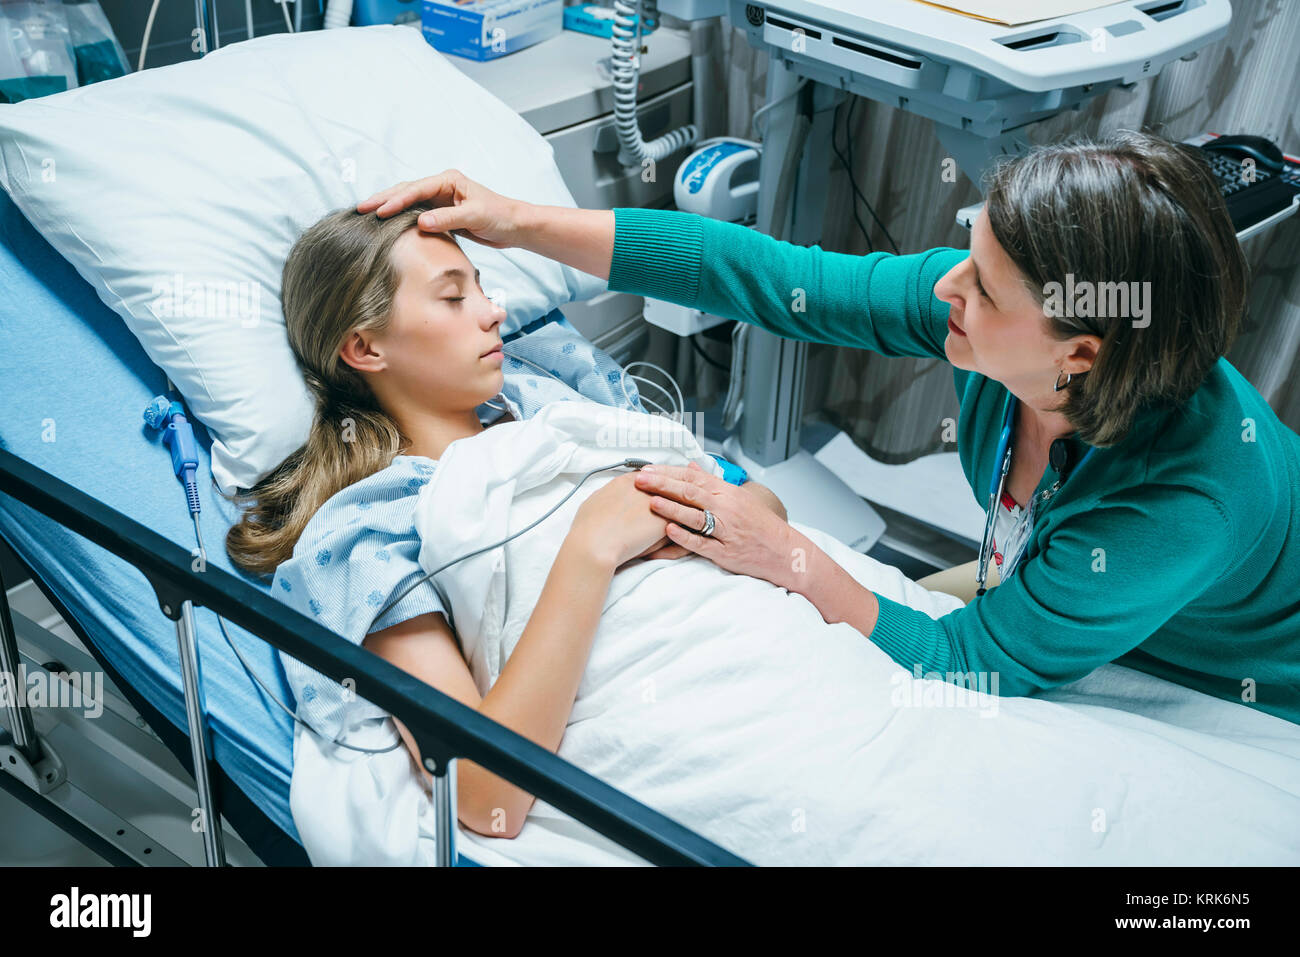 Caucasian doctor comforting patient in hospital bed Stock Photo